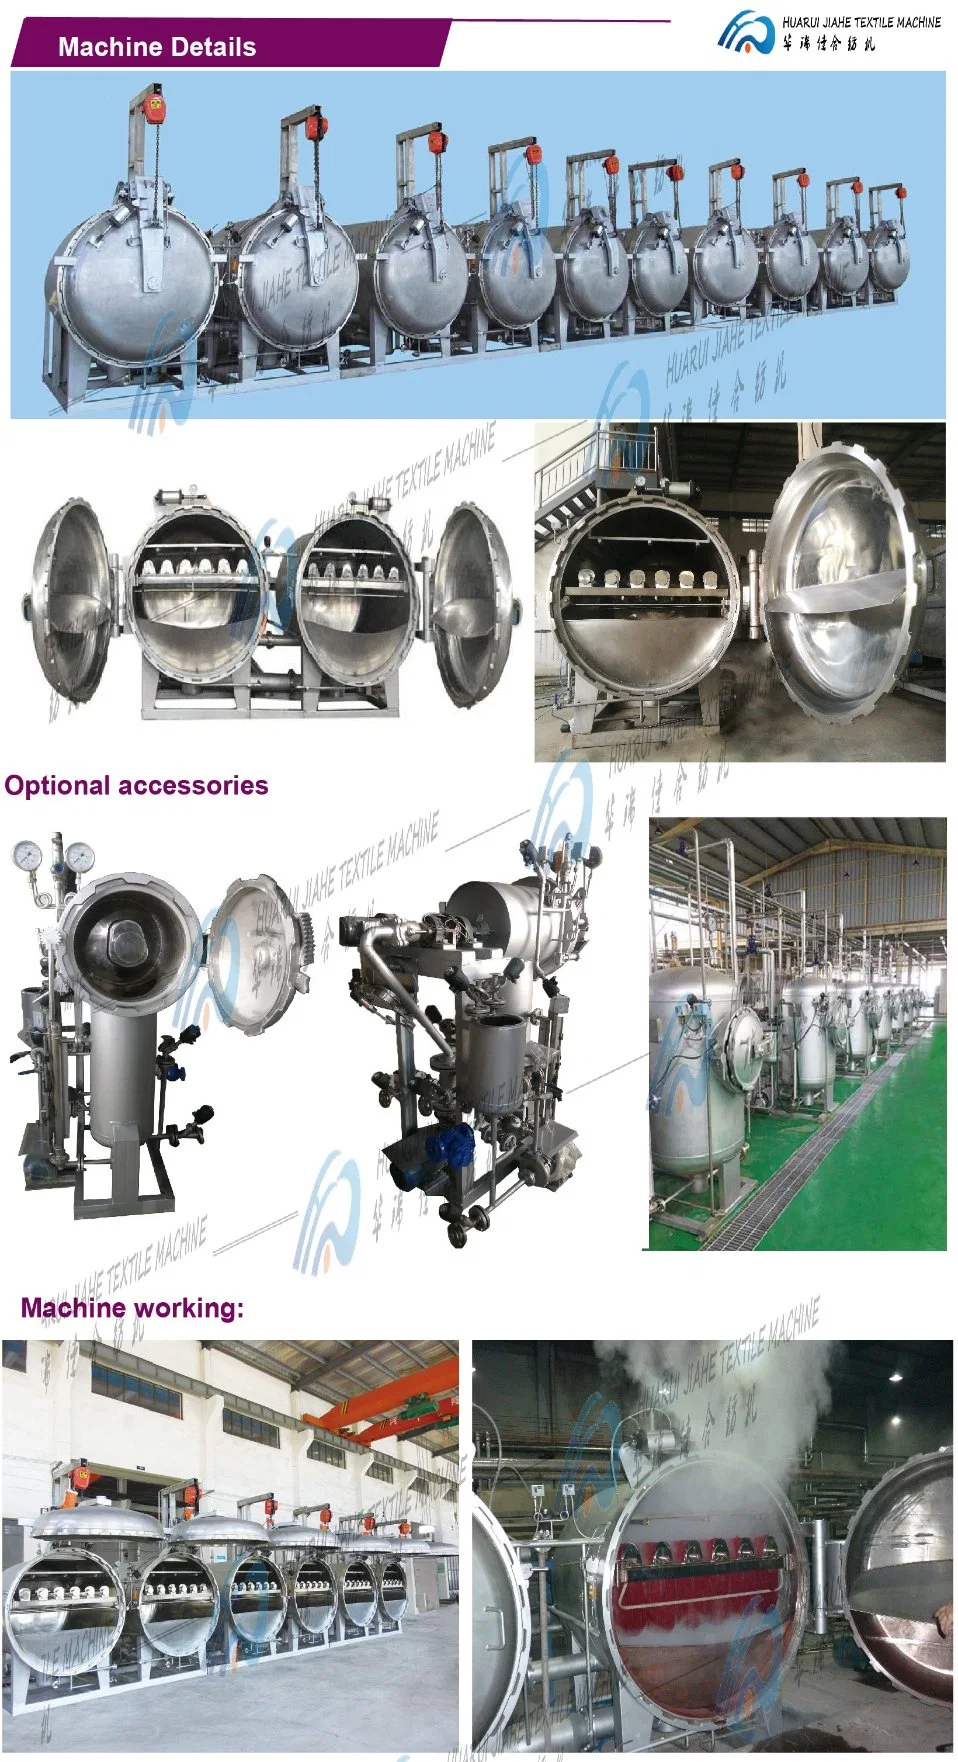 Multifunctional Dyed Yarn / Hydraulic Press Saving Raw Materials and Reduce Costs Dyeing Machine for Rubber Vulcanization for Skein Yarn No Knot Situation